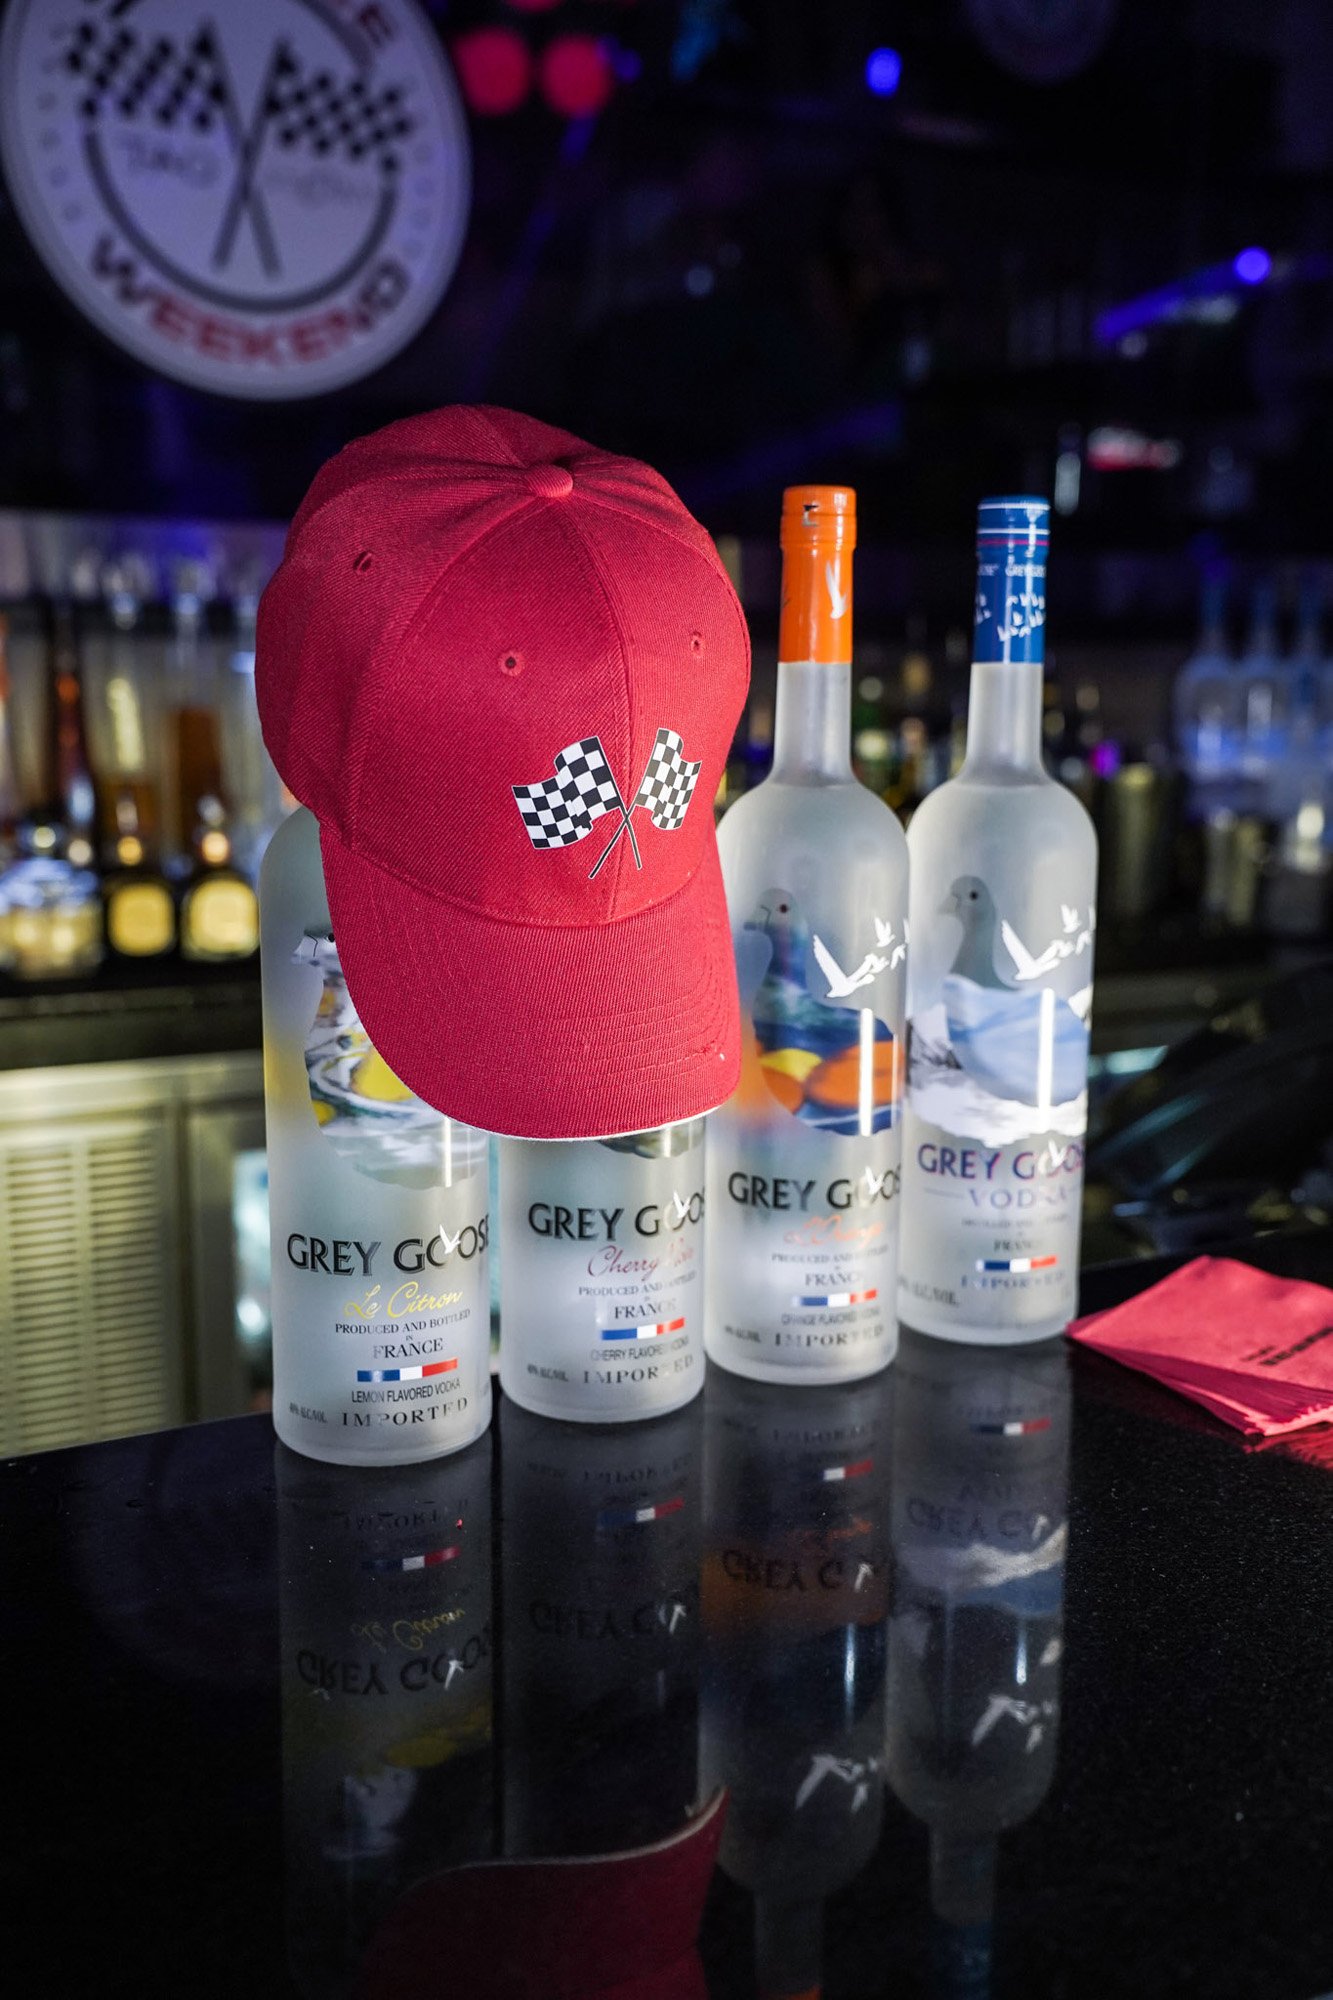 Grey goose with red hat.jpg